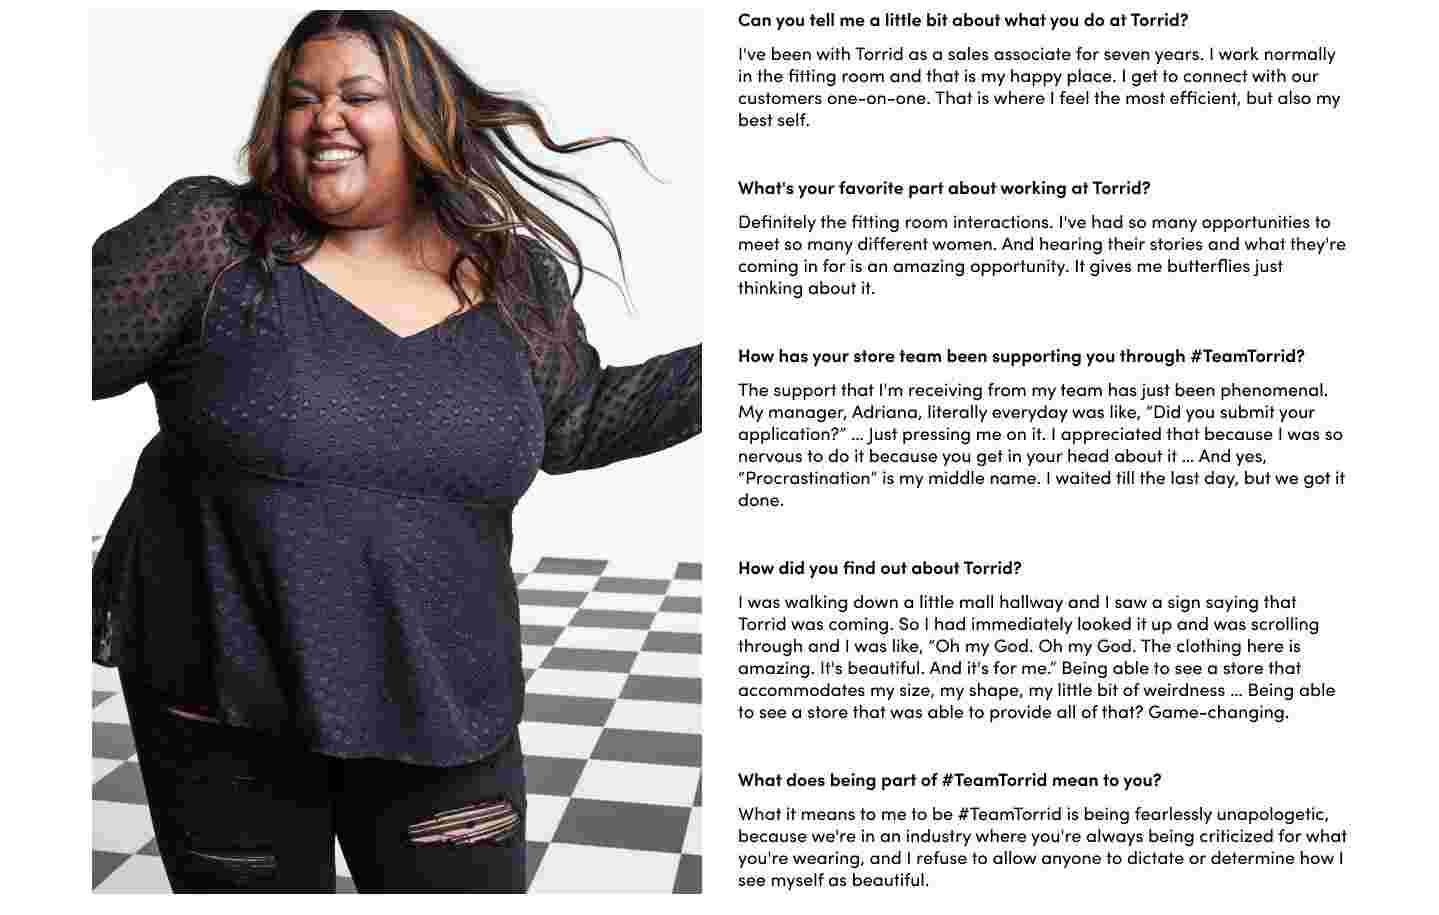 Can you tell me a little bit about what you do at Torrid? I've been with Torrid as a sales associate for seven years. I work normally in the fitting room and that is my happy place. I get to connect with our customers one-on-one. That is where I feel the most efficient, but also my best self. What's your favorite part about working at Torrid? Definitely the fitting room interactions. I've had so many opportunities to meet so many different women. And hearing their stories and what they're coming in for is an amazing opportunity. It gives me butterflies just thinking about it. How has your store team been supporting you through #TeamTorrid? The support that I'm receiving from my team has just been phenomenal. My manager, Adriana, literally everyday was like, “Did you submit your application?” … Just pressing me on it. I appreciated that because I was so nervous to do it because you get in your head about it … And yes, “Procrastination” is my middle name. I waited till the last day, but we got it done. How did you find out about Torrid? I was walking down a little mall hallway and I saw a sign saying that Torrid was coming. So I had immediately looked it up and was scrolling through and I was like, “Oh my God. Oh my God. The clothing here is amazing. It's beautiful. And it's for me.” Being able to see a store that accommodates my size, my shape, my little bit of weirdness … Being able to see a store that was able to provide all of that? Game-changing. What does being part of #TeamTorrid mean to you? What it means to me to be #TeamTorrid is being fearlessly unapologetic, because we're in an industry where you're always being criticized for what you're wearing, and I refuse to allow anyone to dictate or determine how I see myself as beautiful.